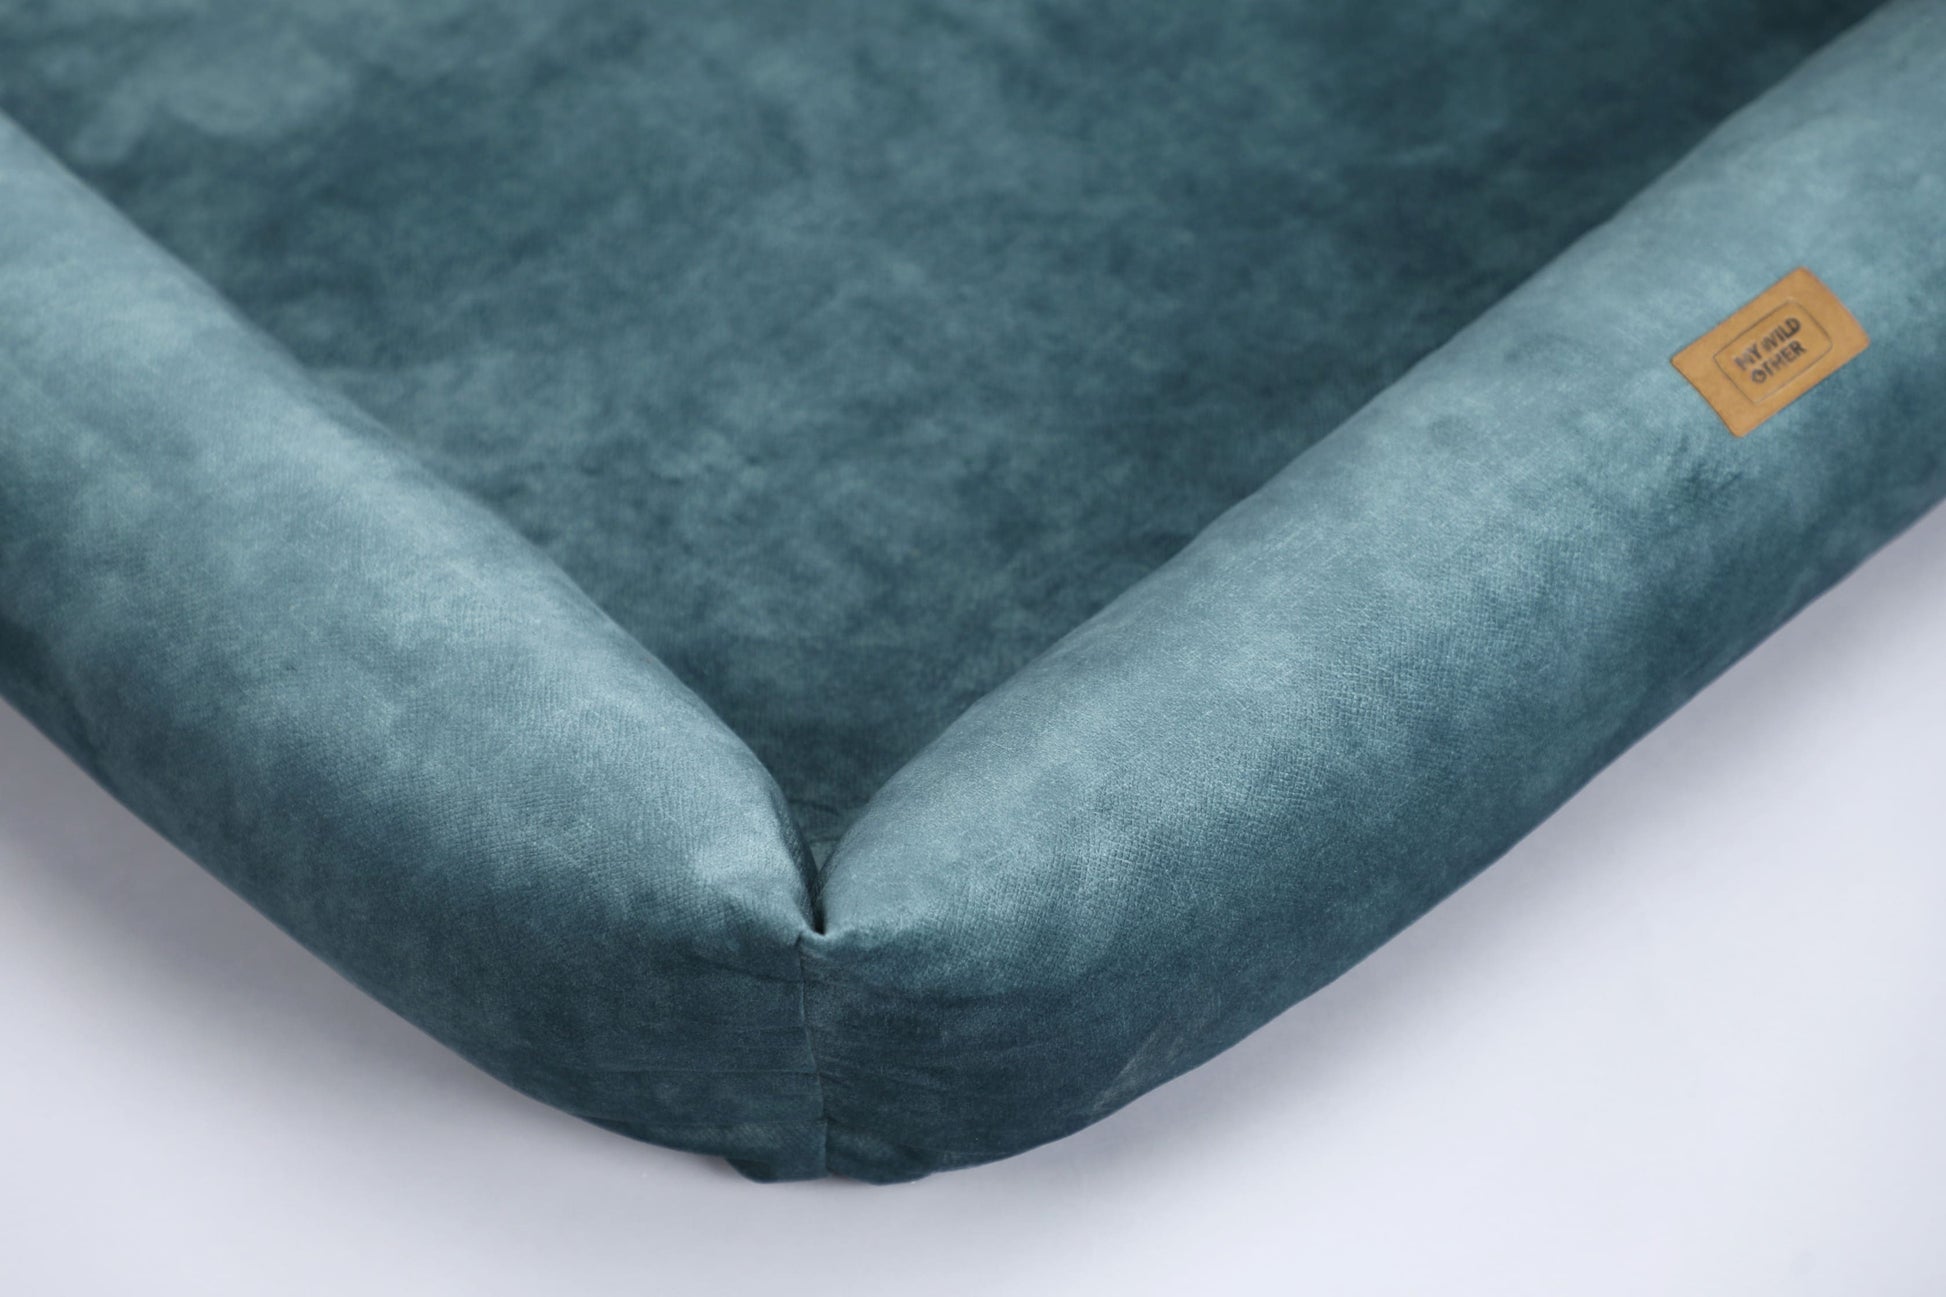 2-sided classic dog bed. DUSTY GREEN - European handmade dog accessories by My Wild Other